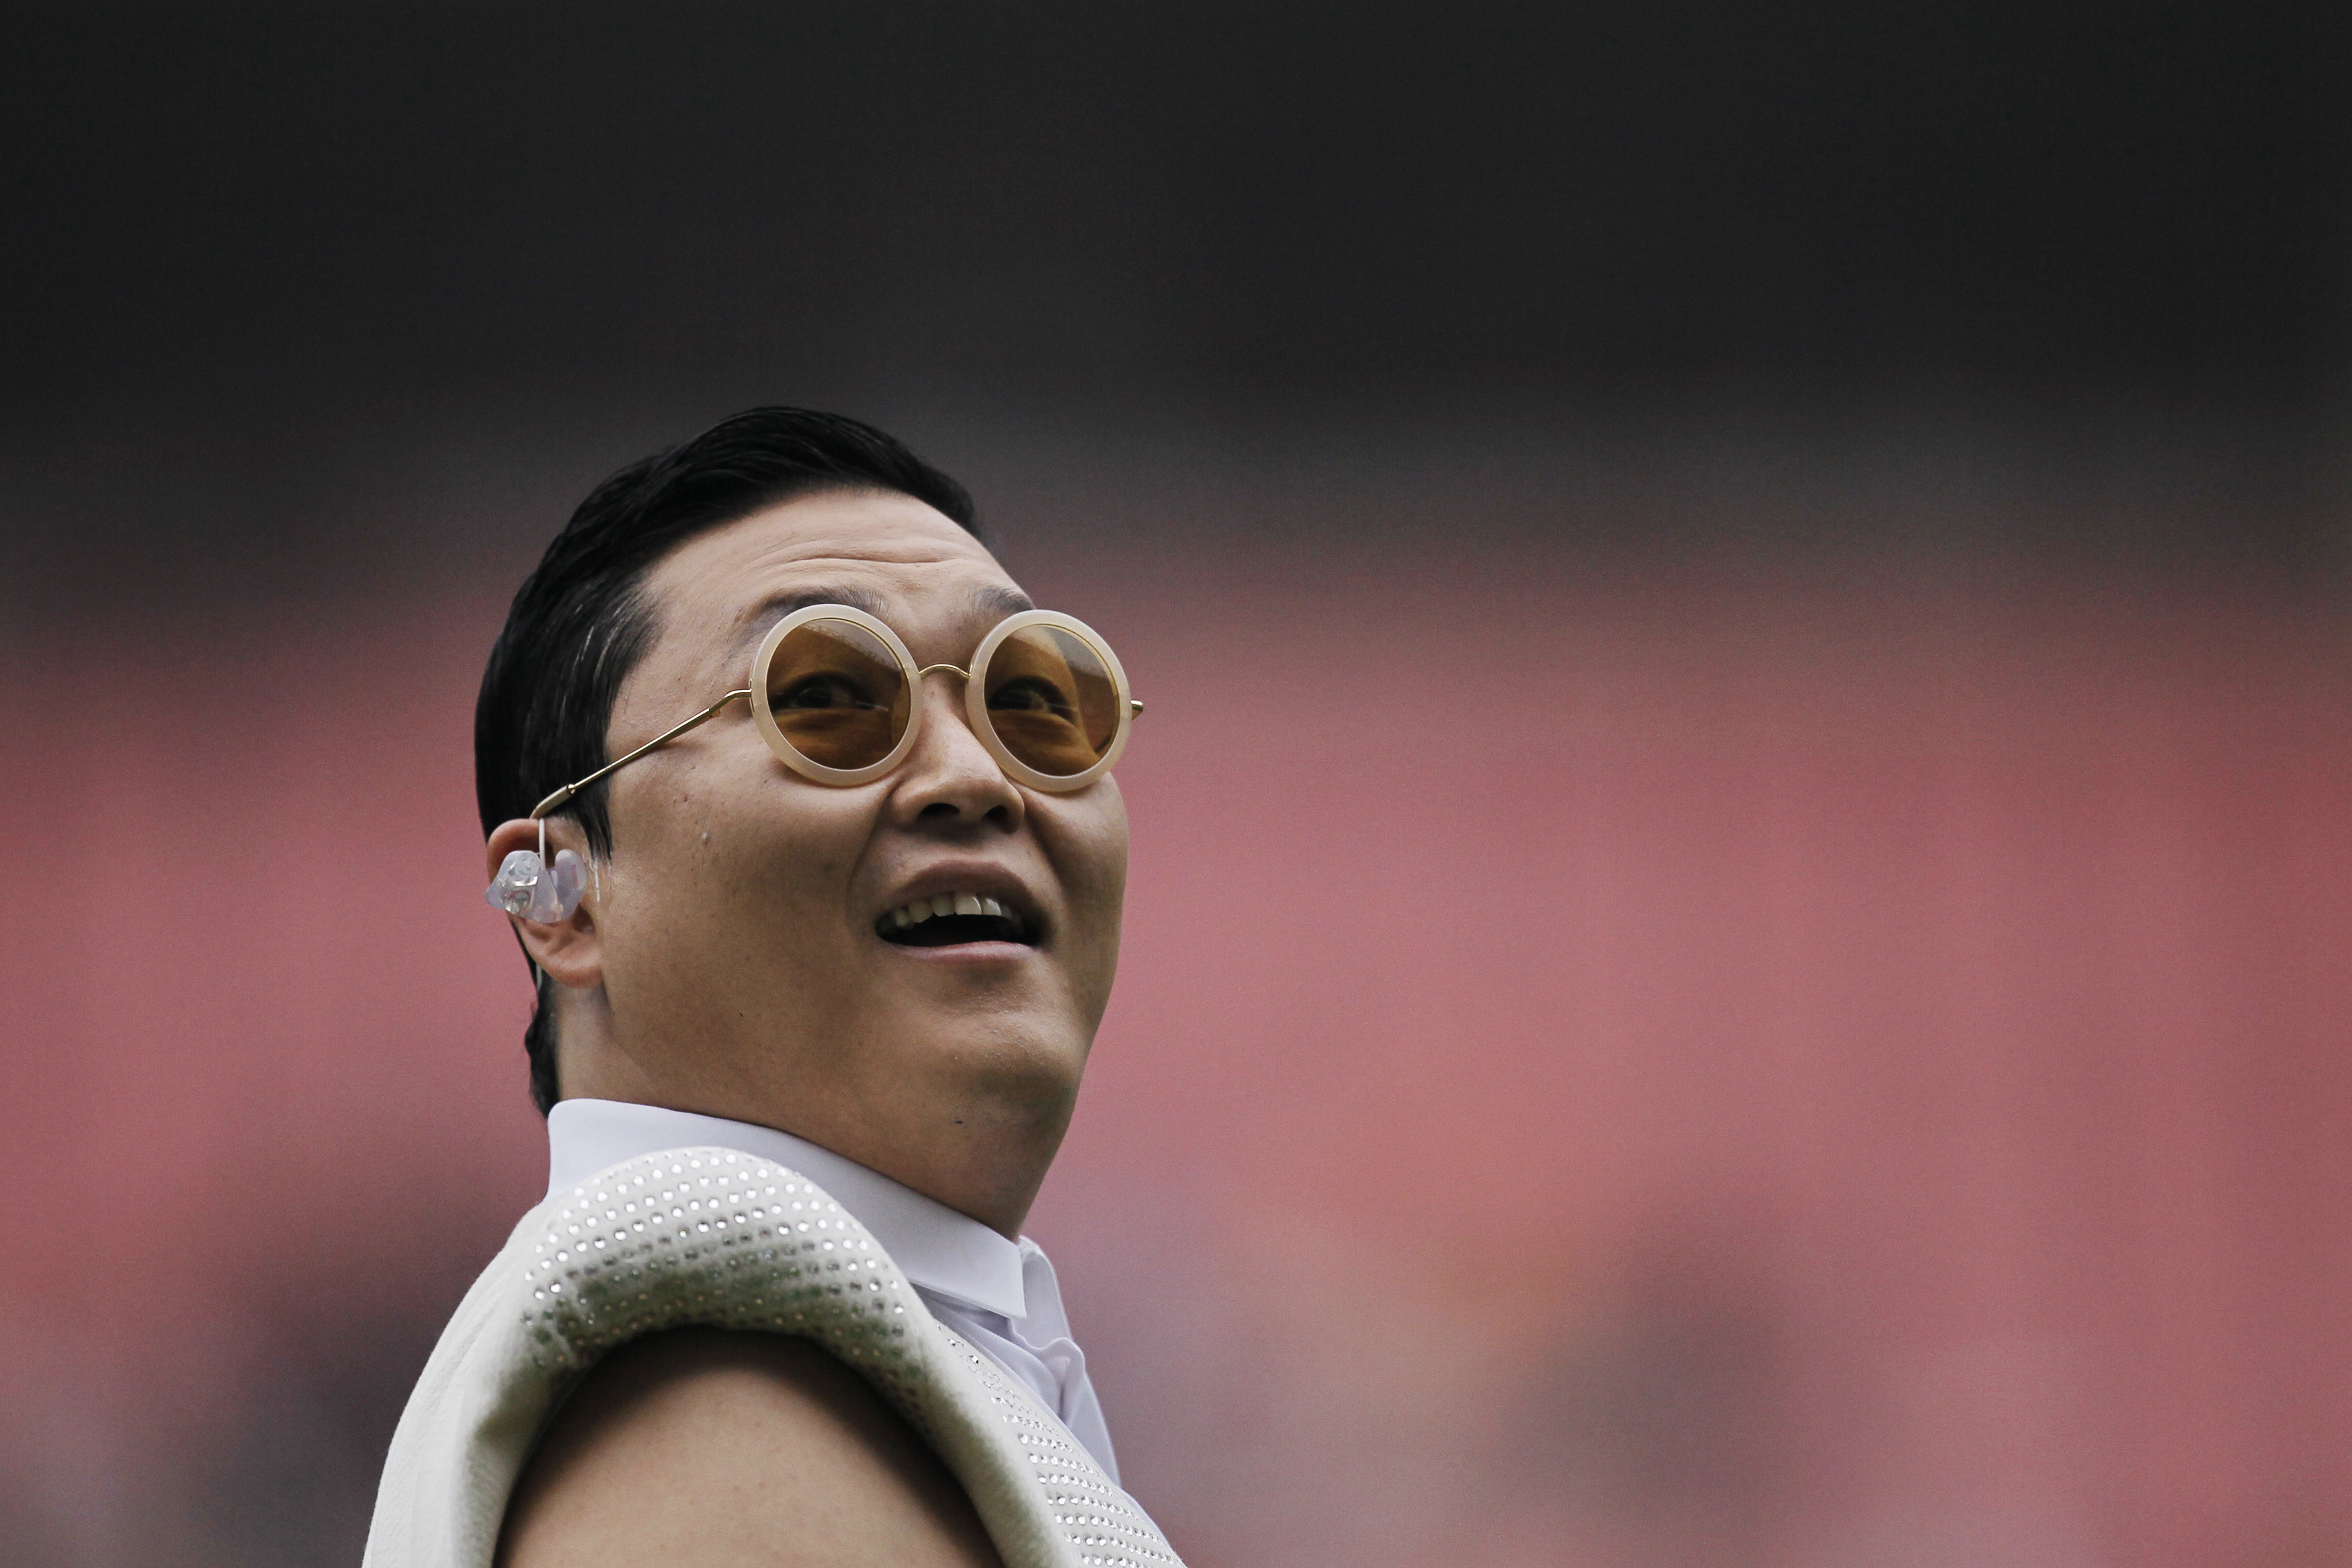 South Korean singer Psy performs during a charity soccer match in Shanghai on June 23, 2013 (Aly Song—Reuters)